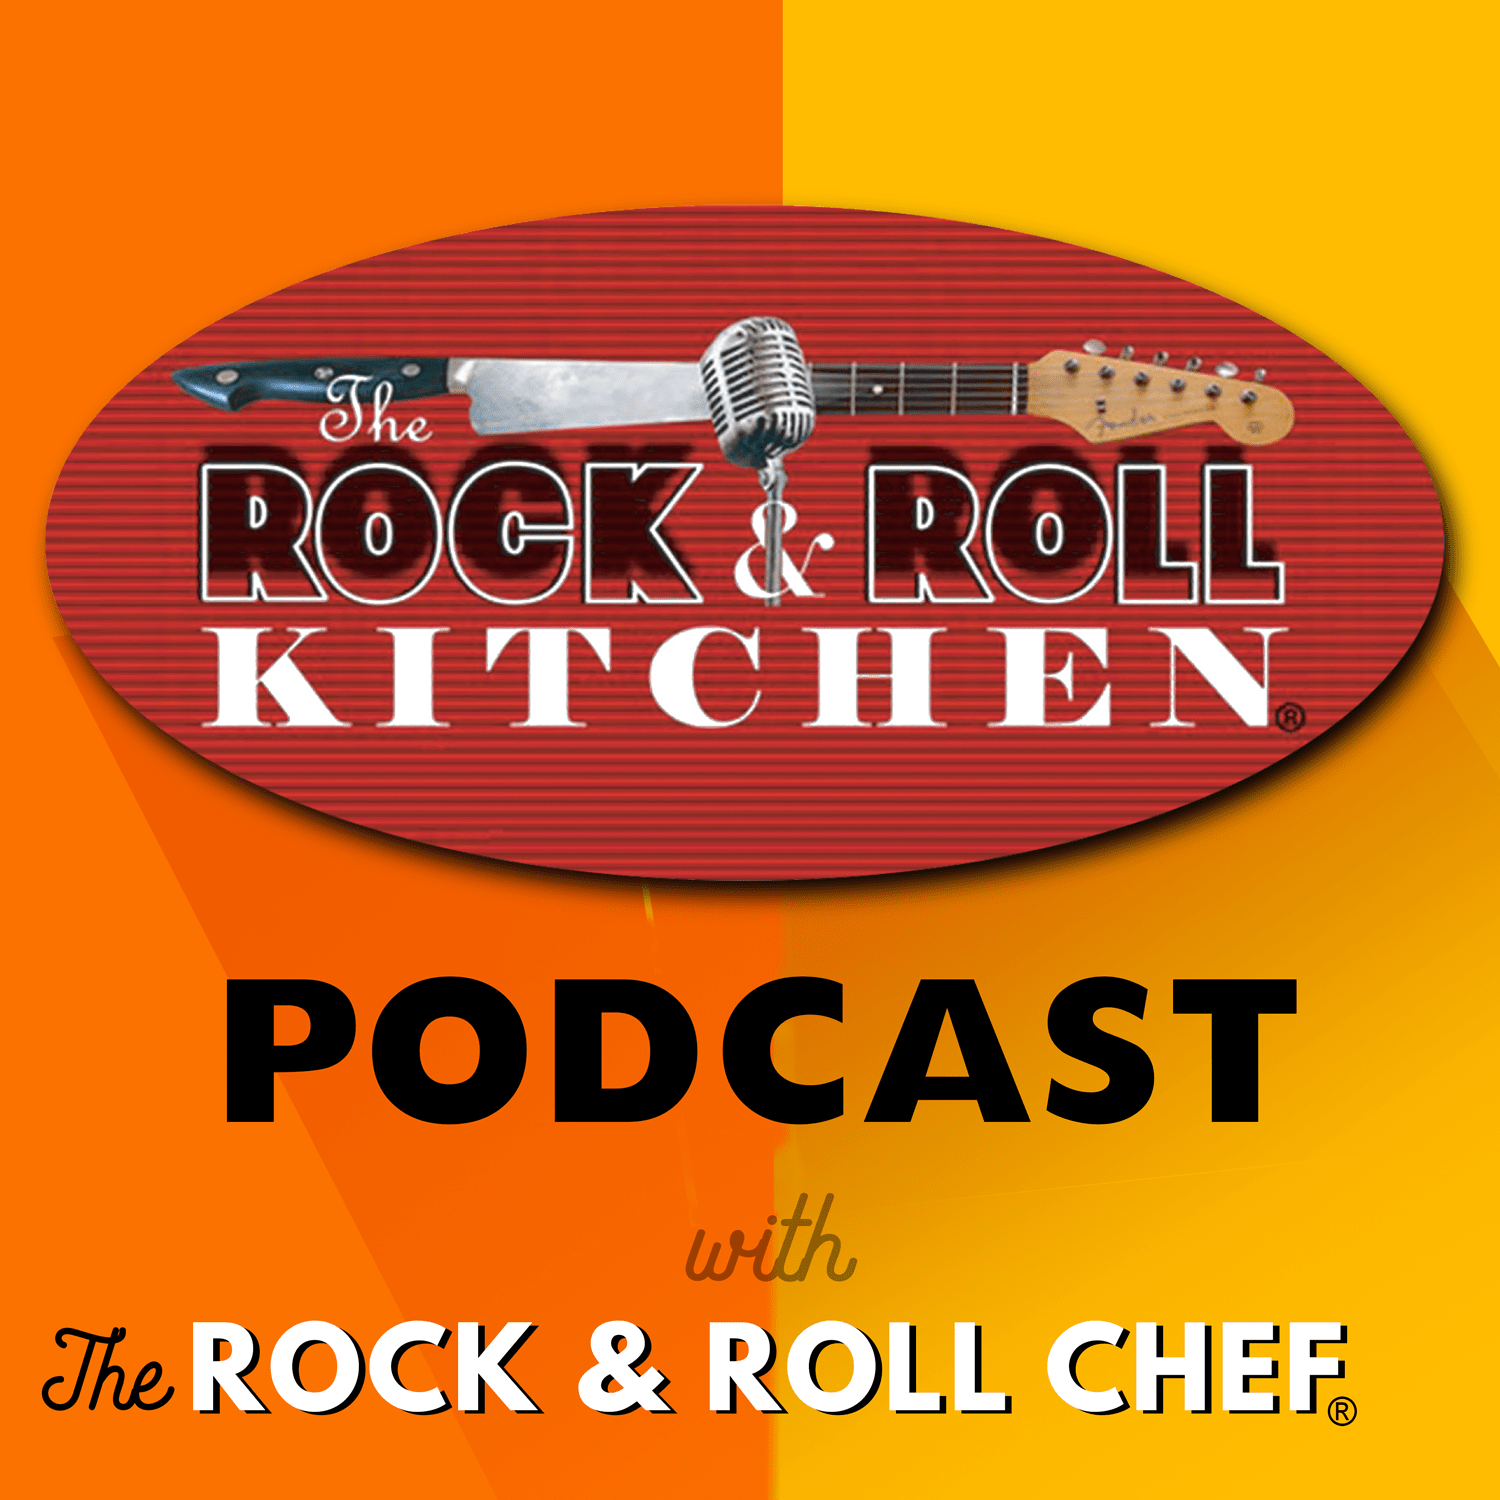 The Rock & Roll Kitchen® Podcast